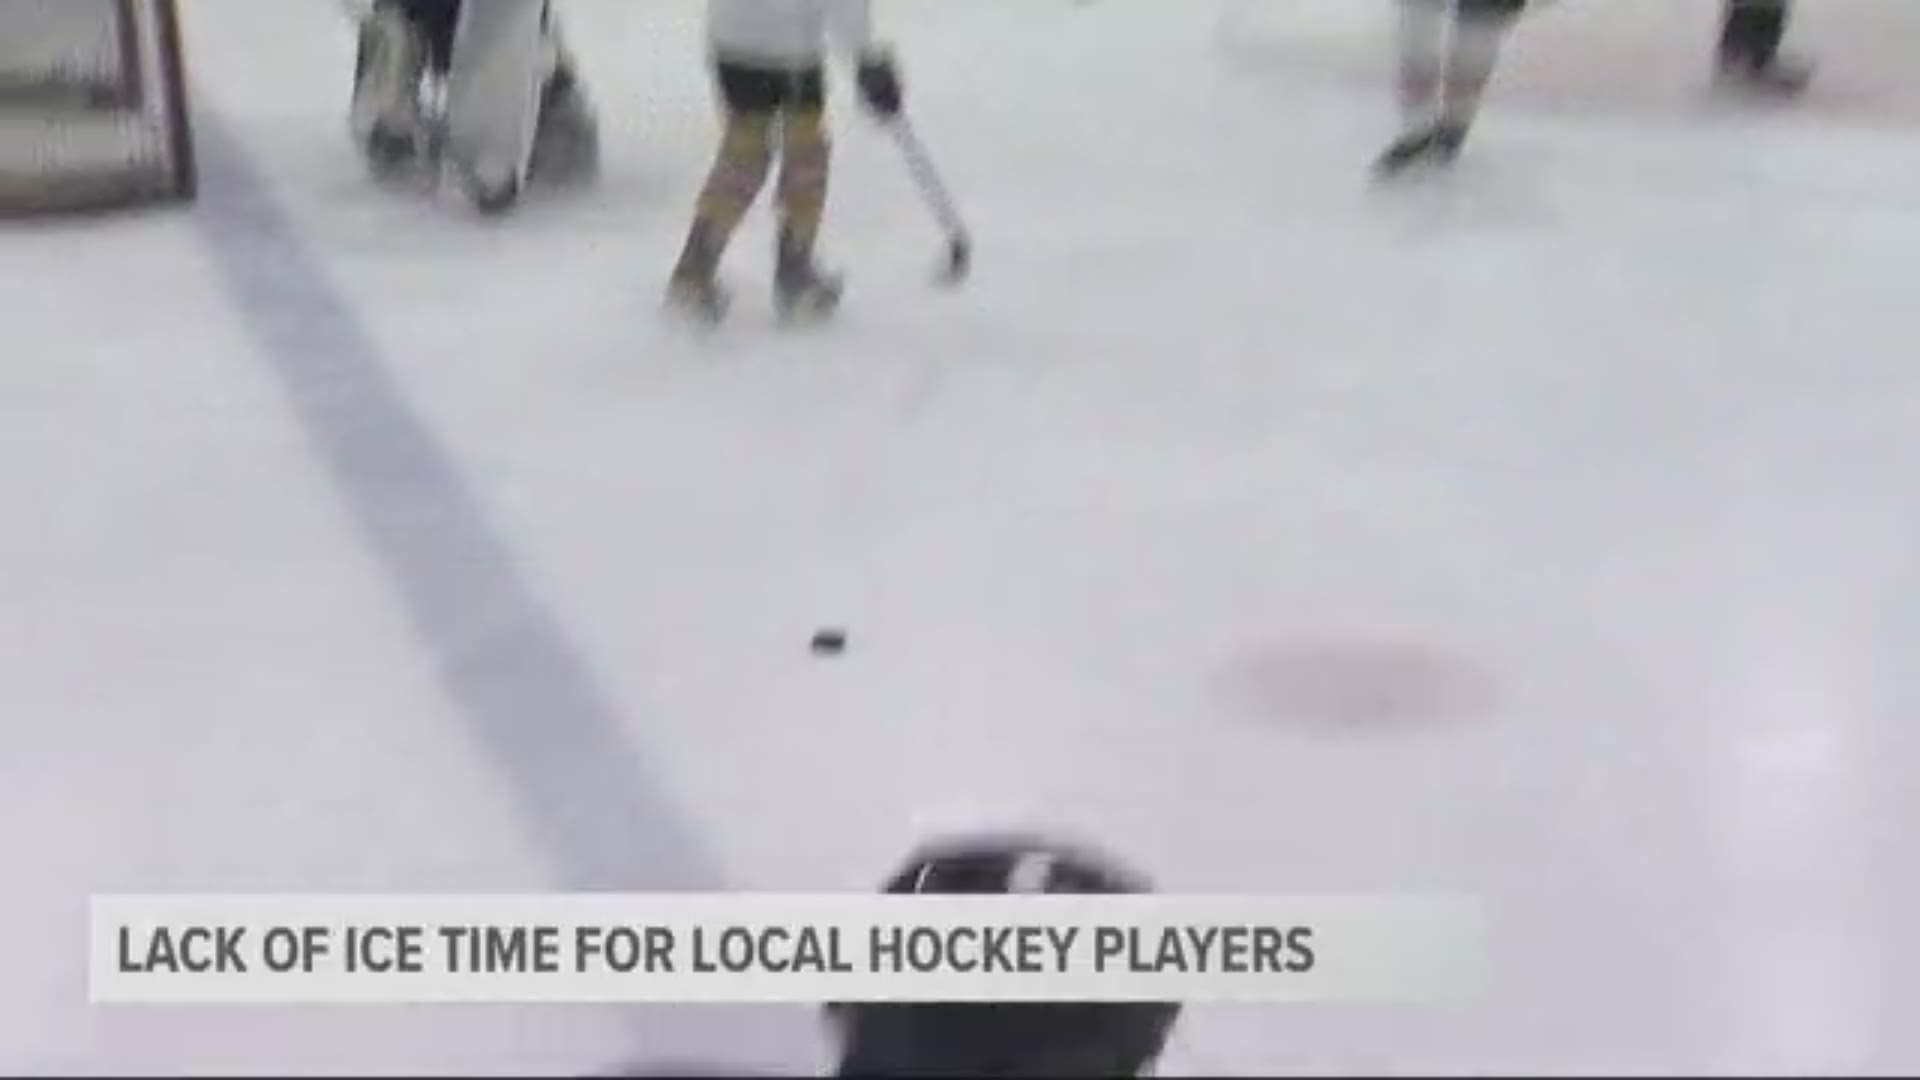 Local hockey players talk about their lack of ice time.